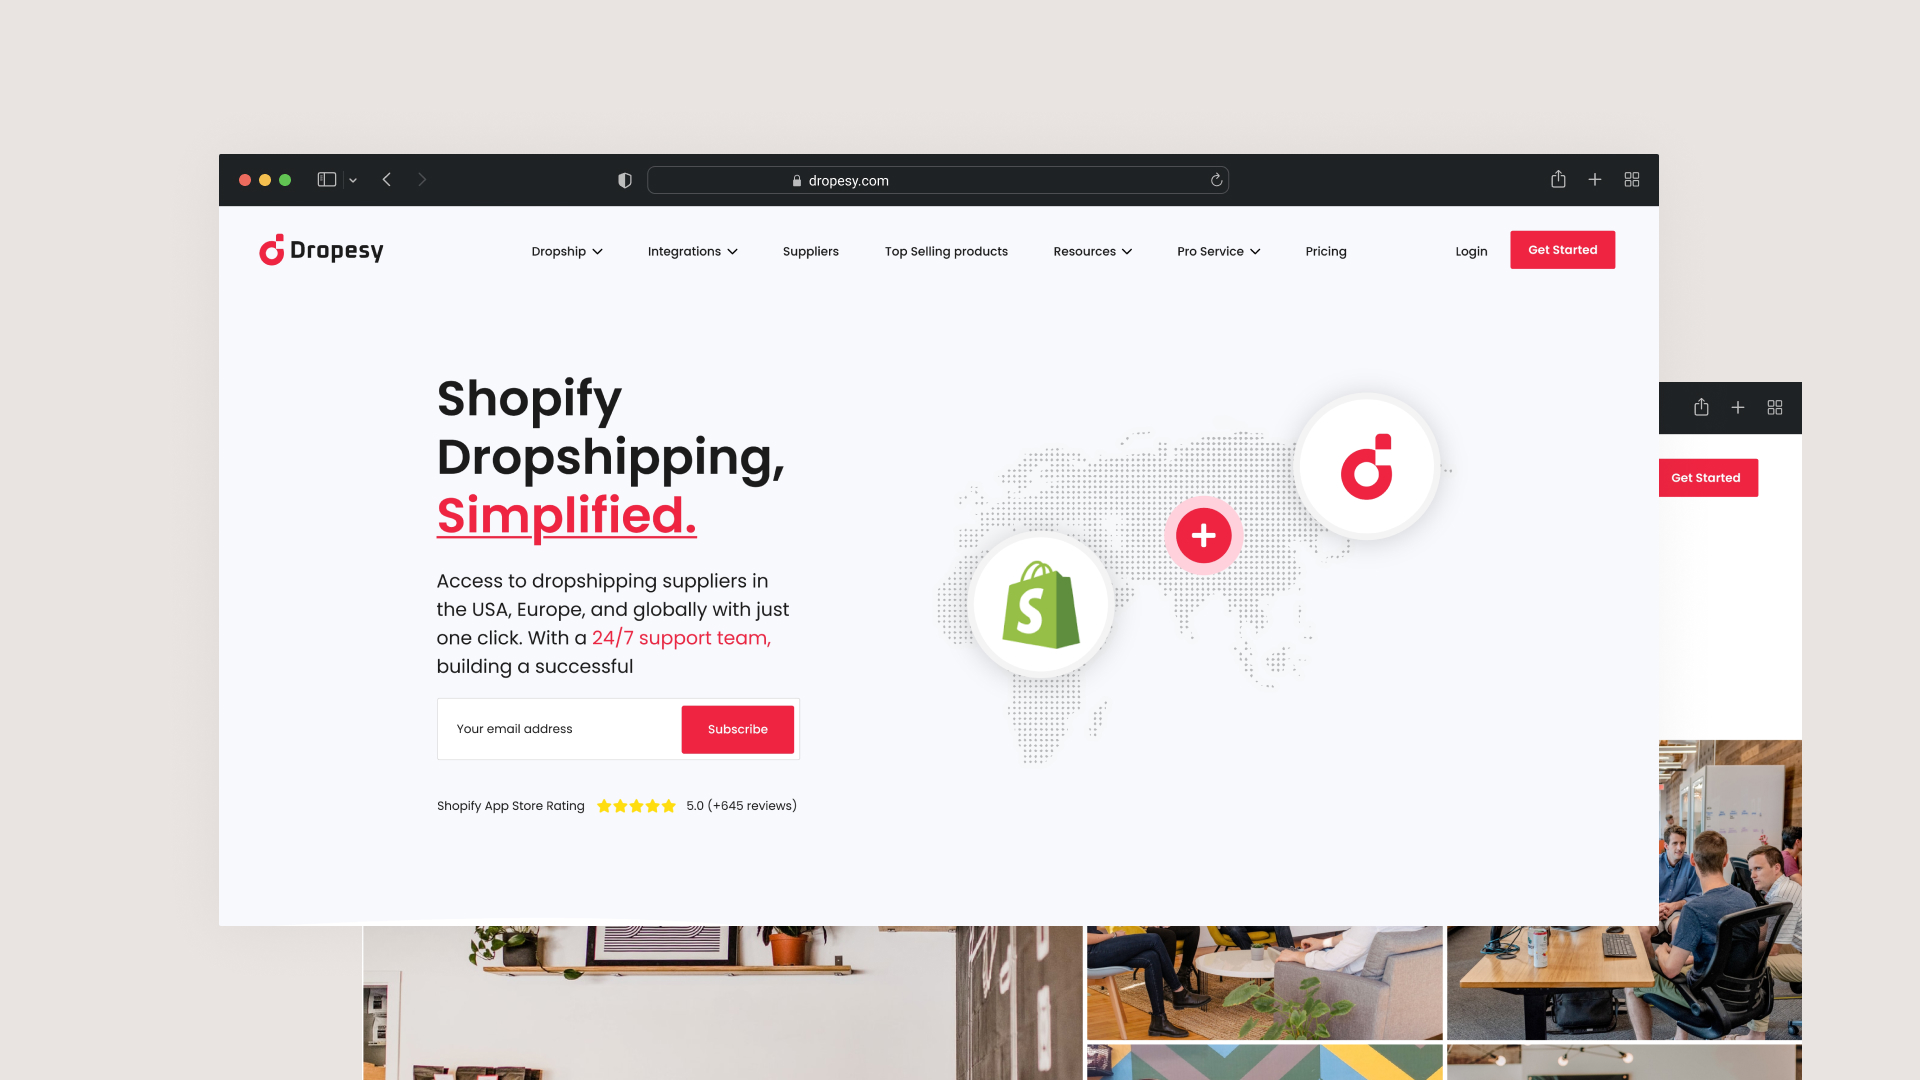 Shopify Dropshipping simplified